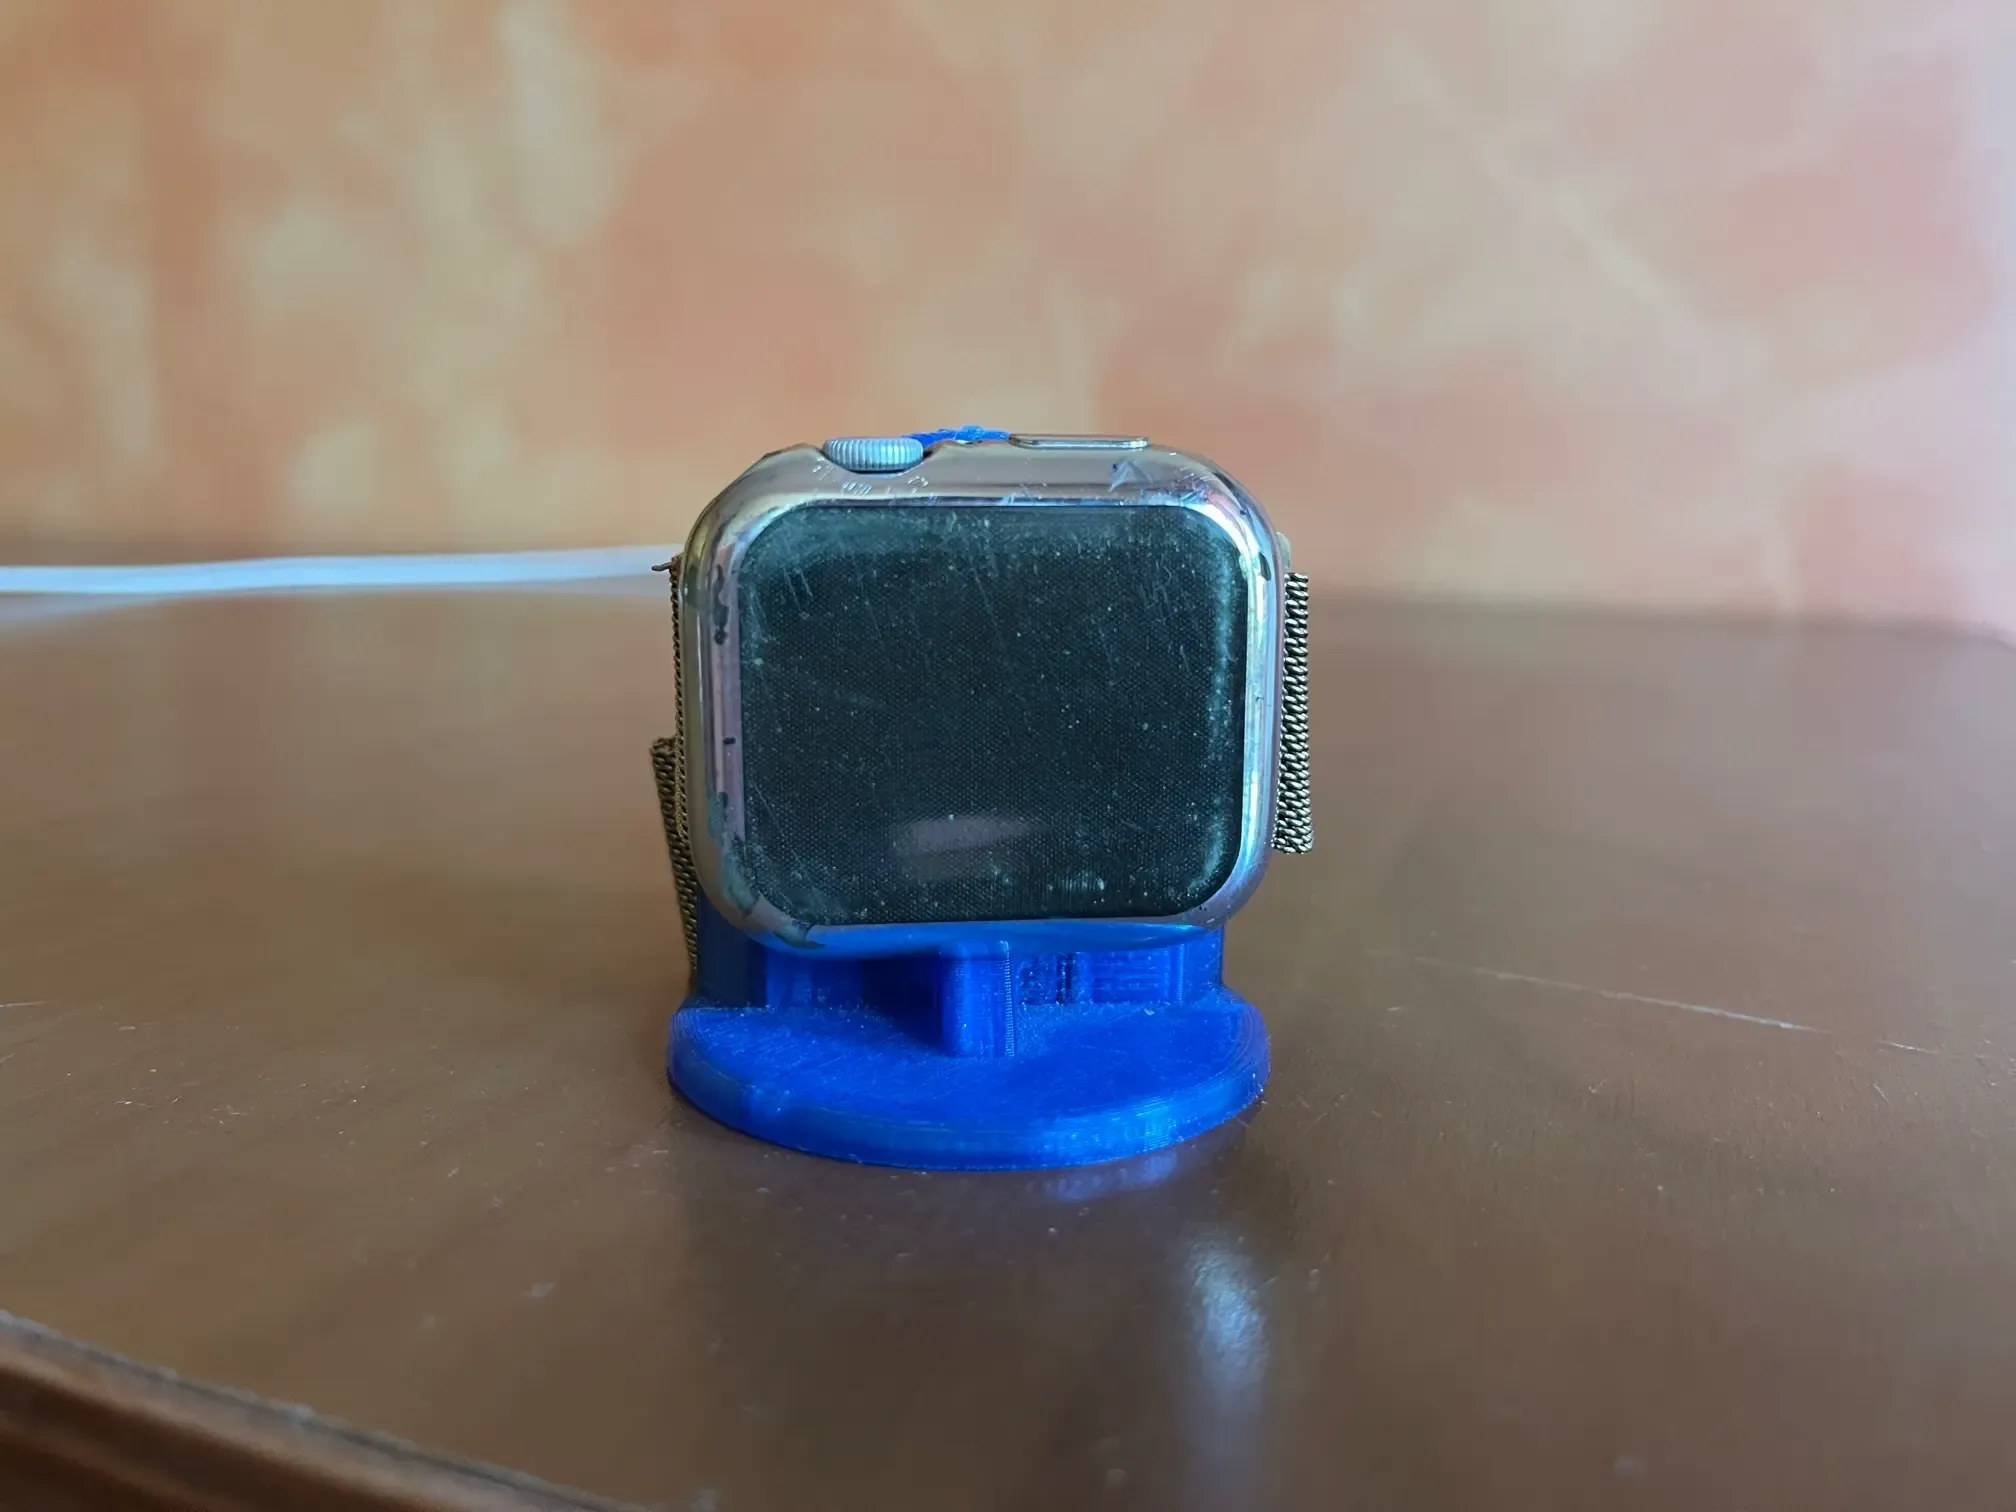 Apple watch recharge stand